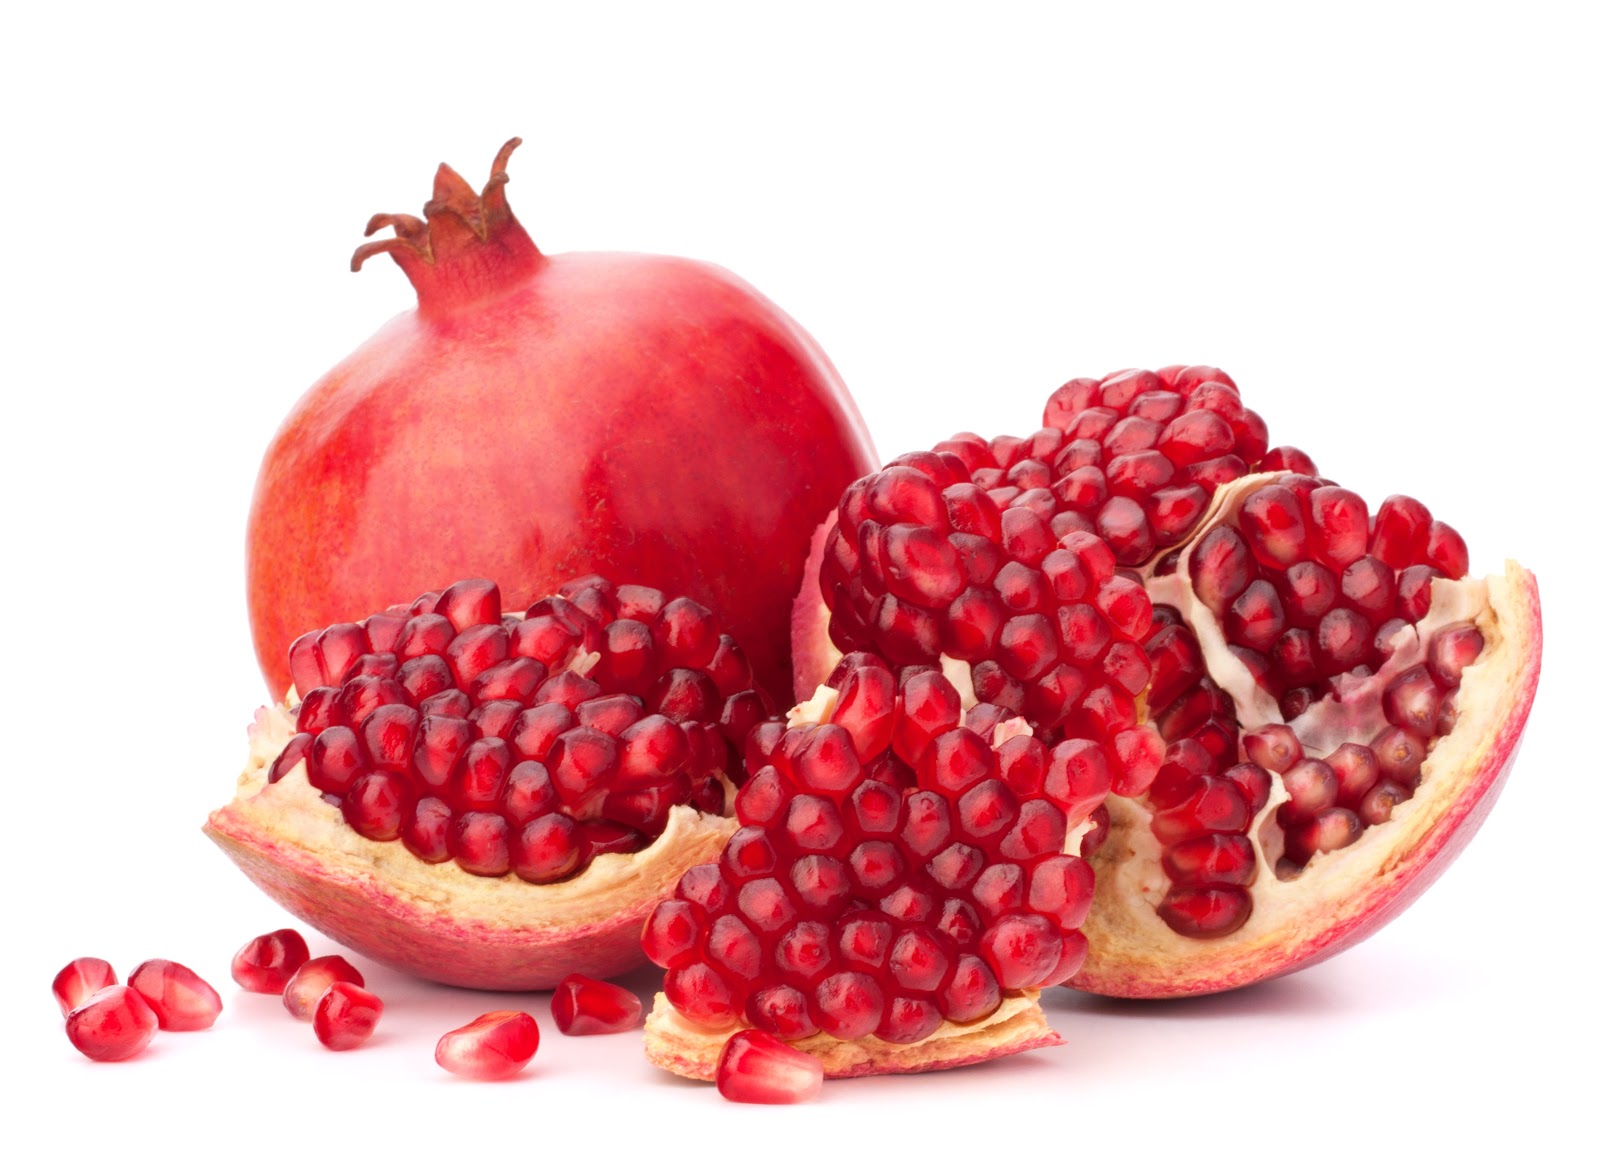 Pomegranate Wallpaper Food Hq Pictures 4k